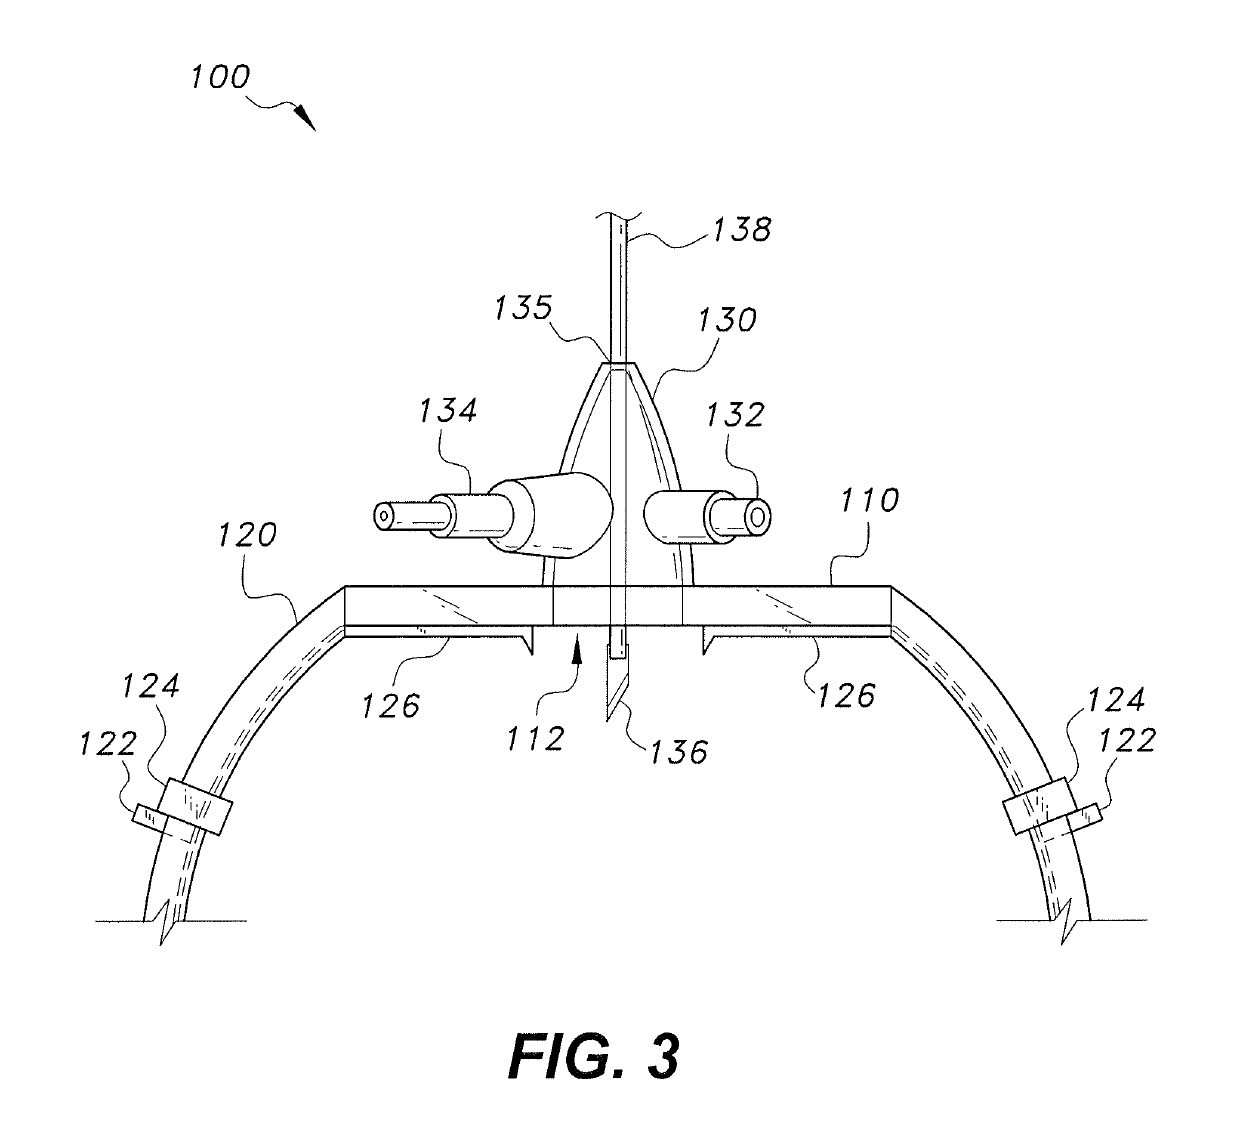 Device for sutureless repair of an injured nerve